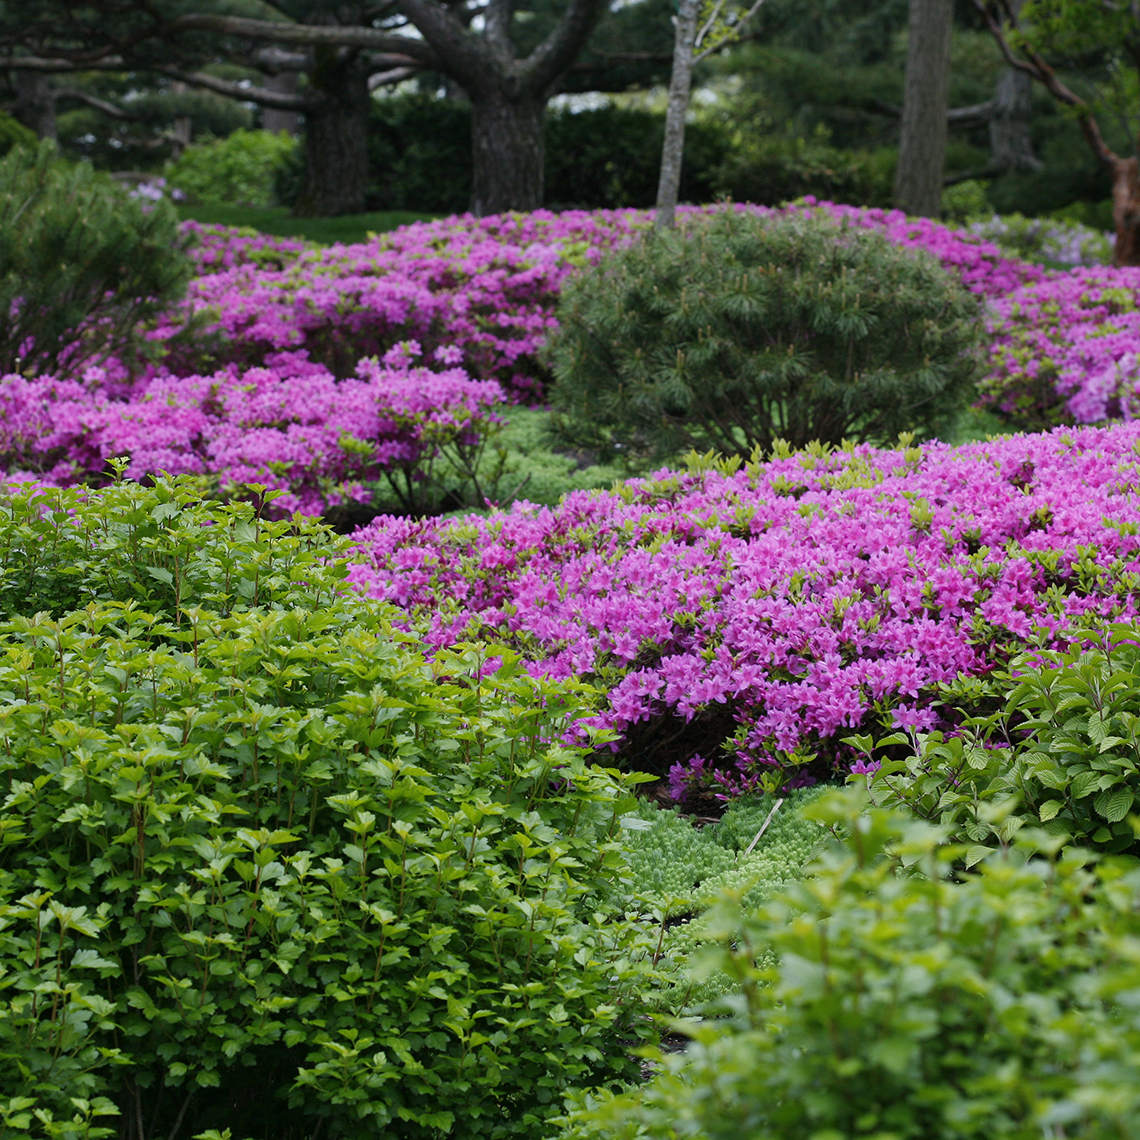 Drifts of Rhododendron Compacta intermixed with evergreen accents in spring landscape